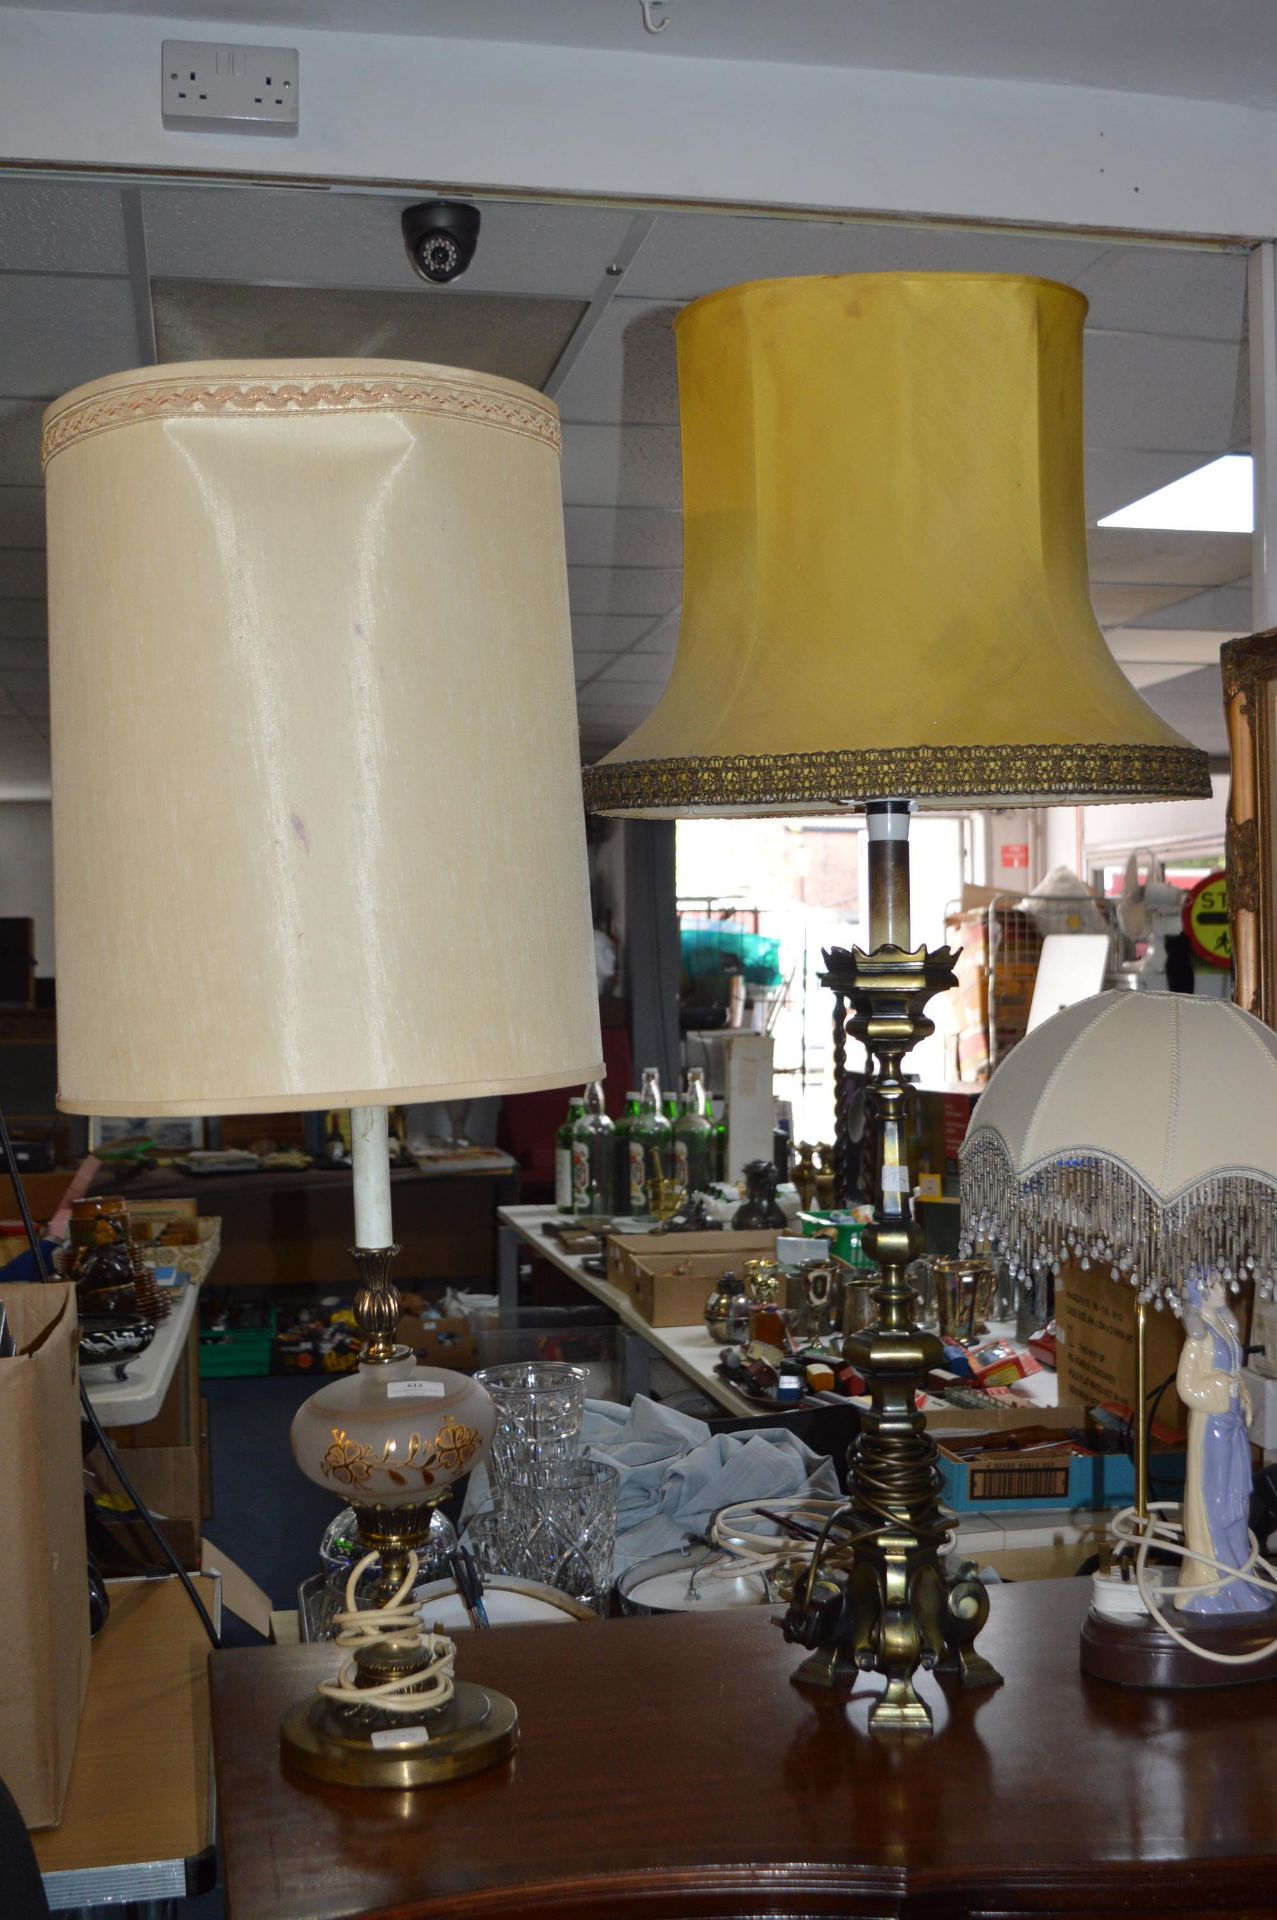 Two Large Table Lamps with Shades (One Glass and O